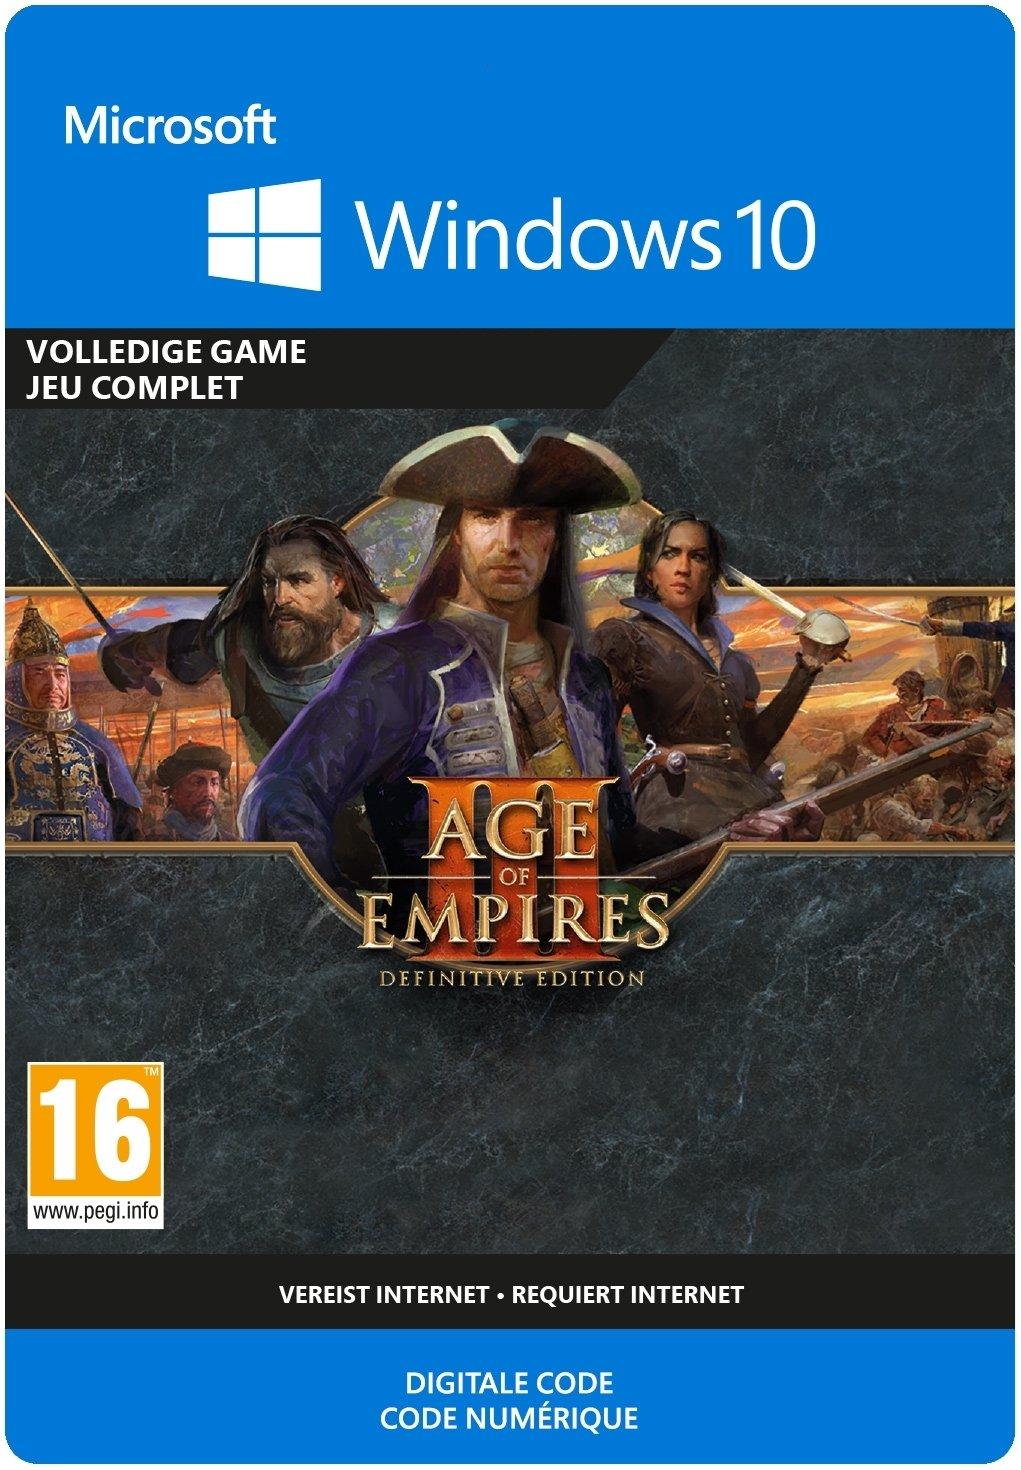 Age of Empires 3: Definitive Edition - Win10 - Game | 2WU-00035 (e2970e1a-8c65-1f4c-af0d-3cd7b4f20515)